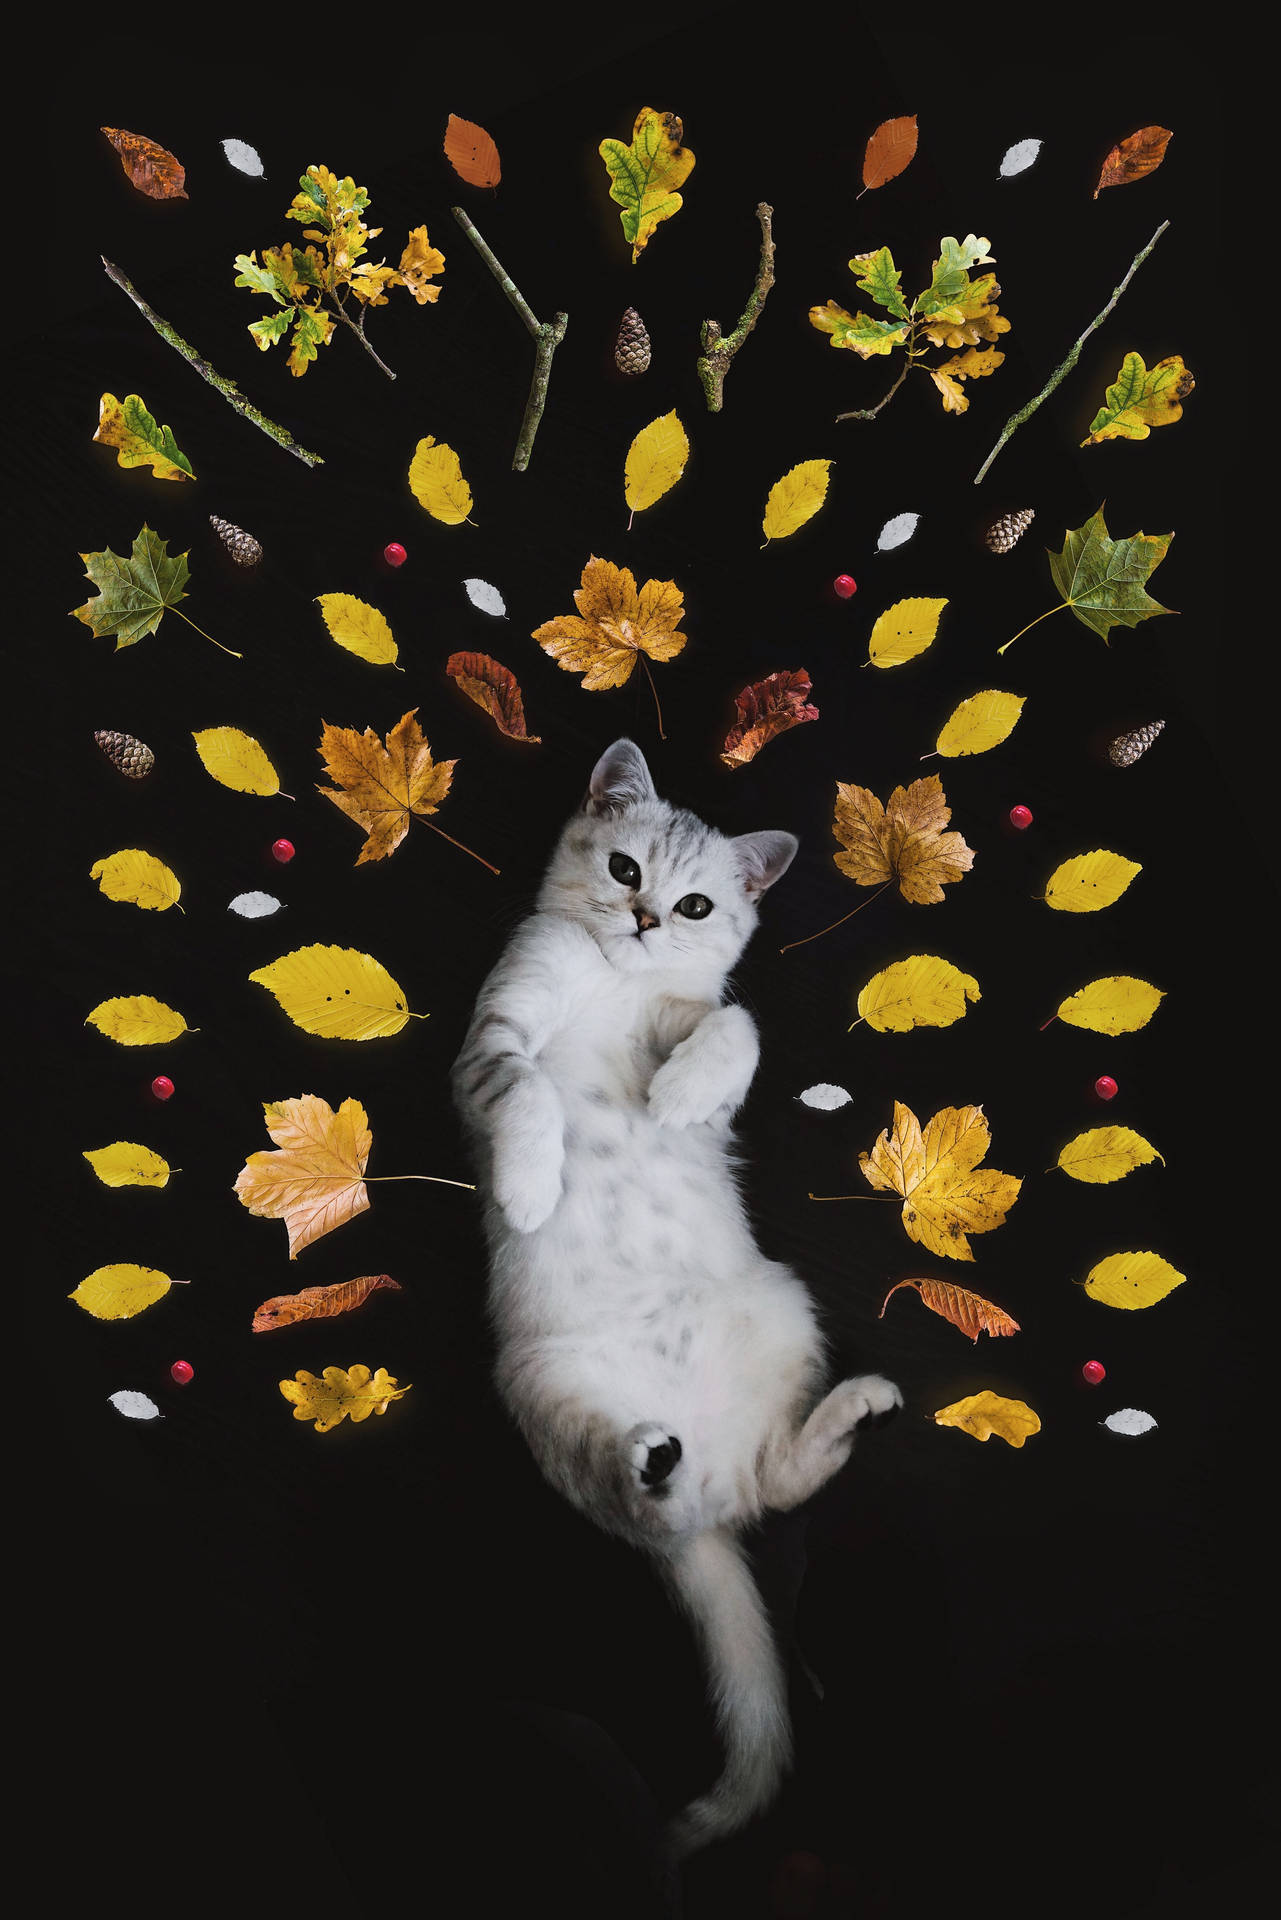 Cute Kitten Surrounded By Leaves Wallpaper